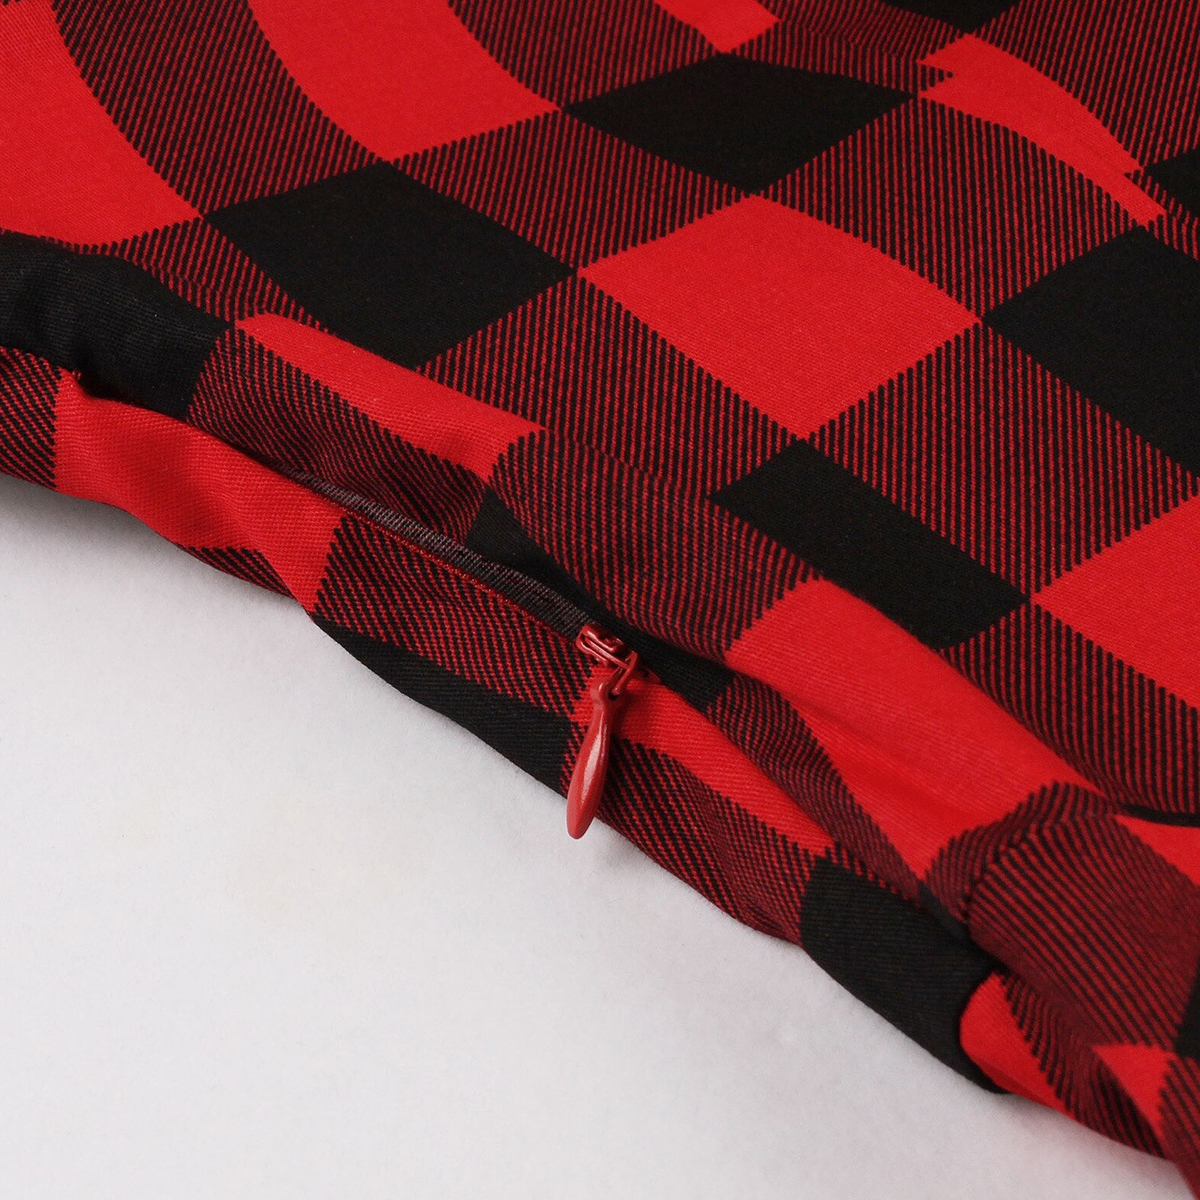 Women Edgy Clothing / Red Plaid Vintage Style Dress / Cotton Zipper Flared Dresses - HARD'N'HEAVY